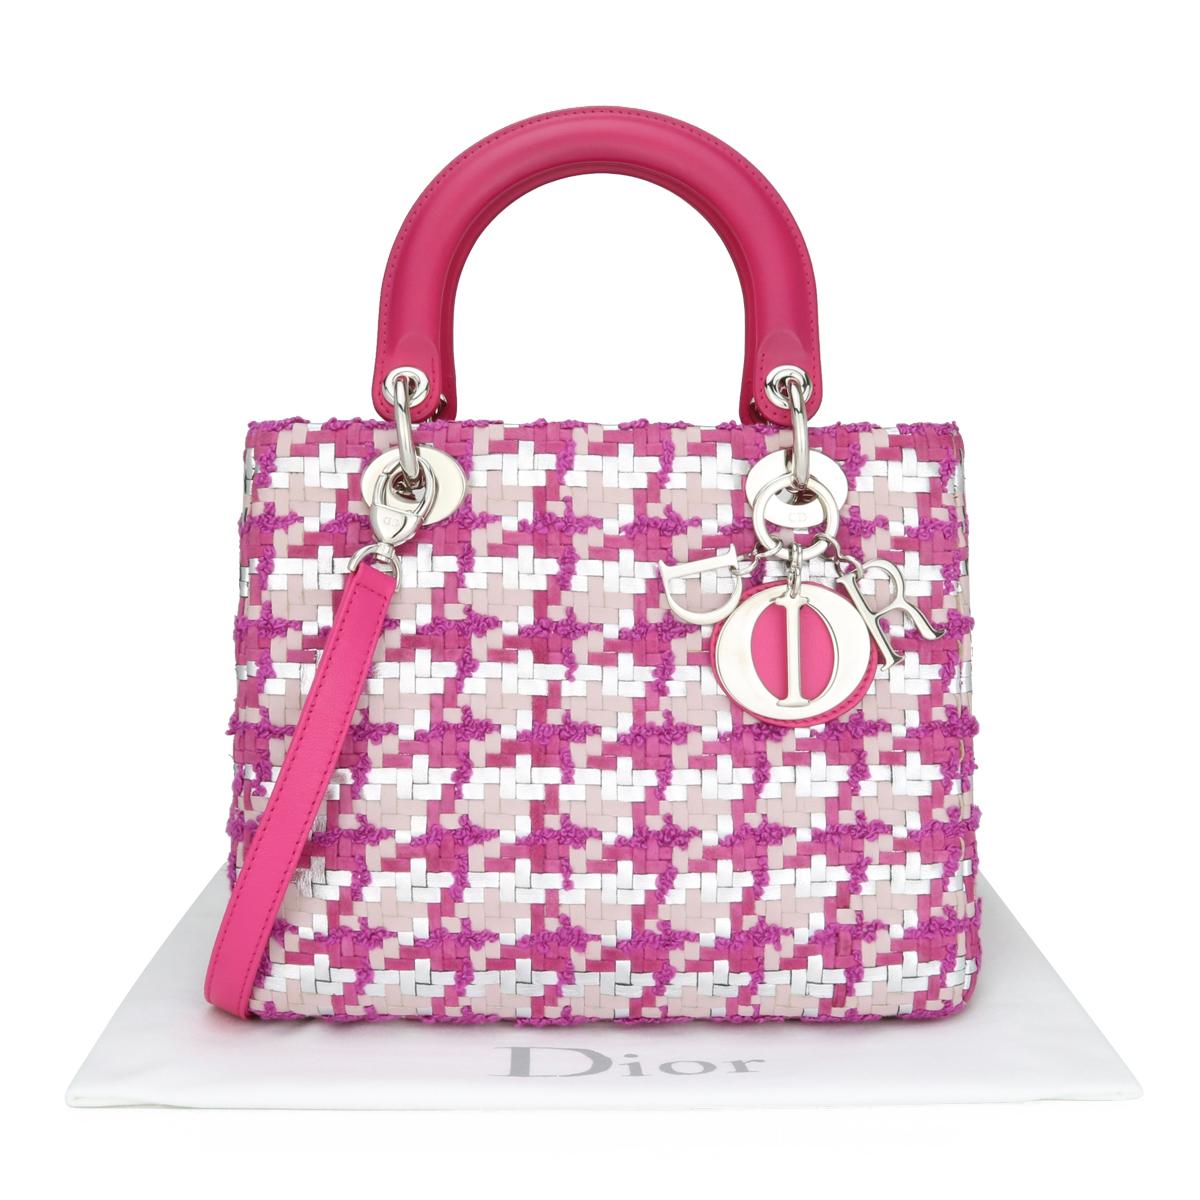 Christian Dior Lady Dior Medium Bag in Pink & Silver Tweed & Leather SHW 2013 For Sale 15